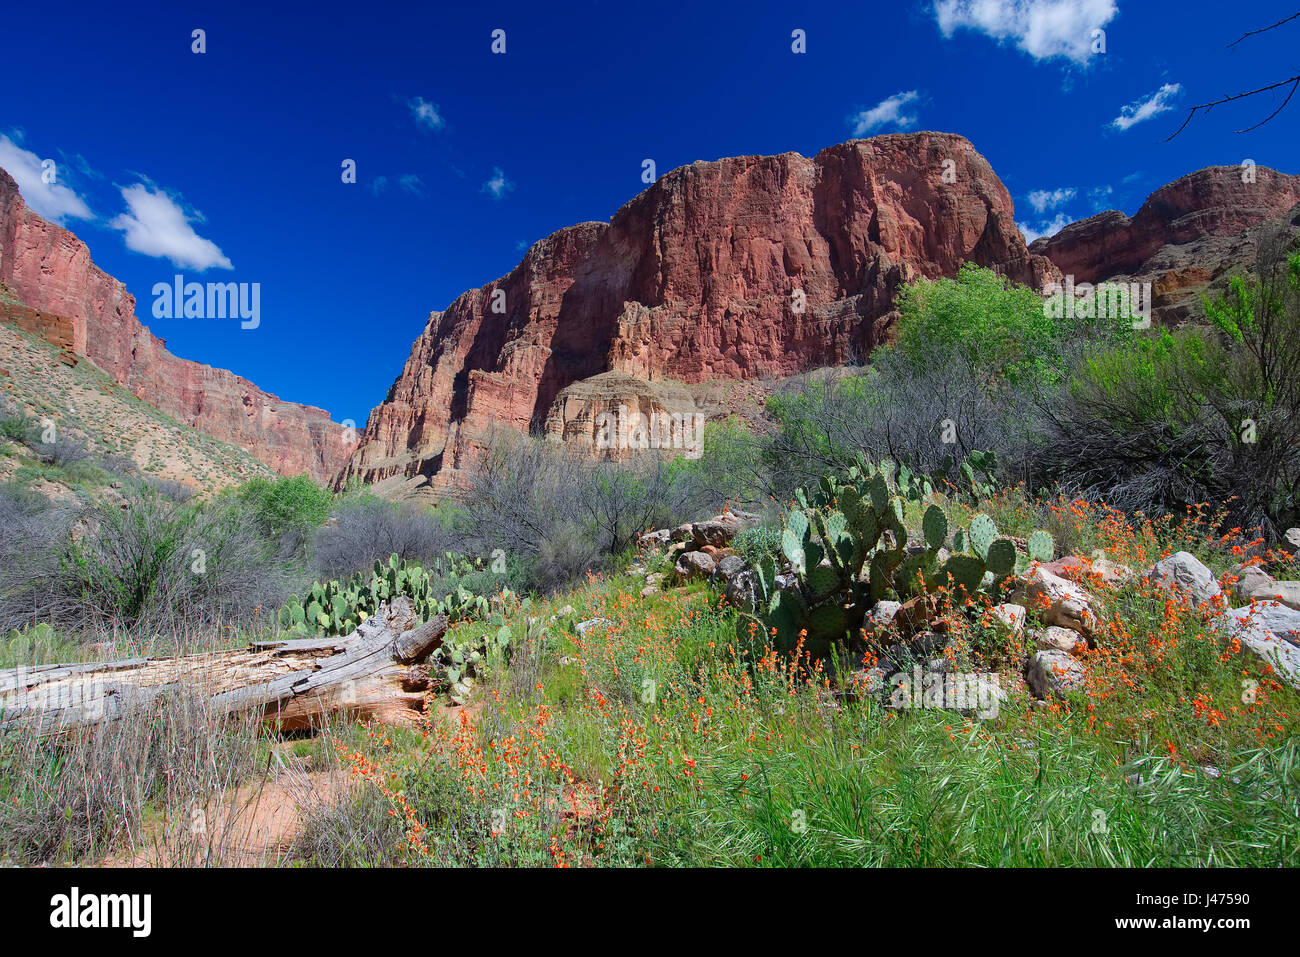 Hike up Deer Creek in Grand Canyon National Park Stock Photo